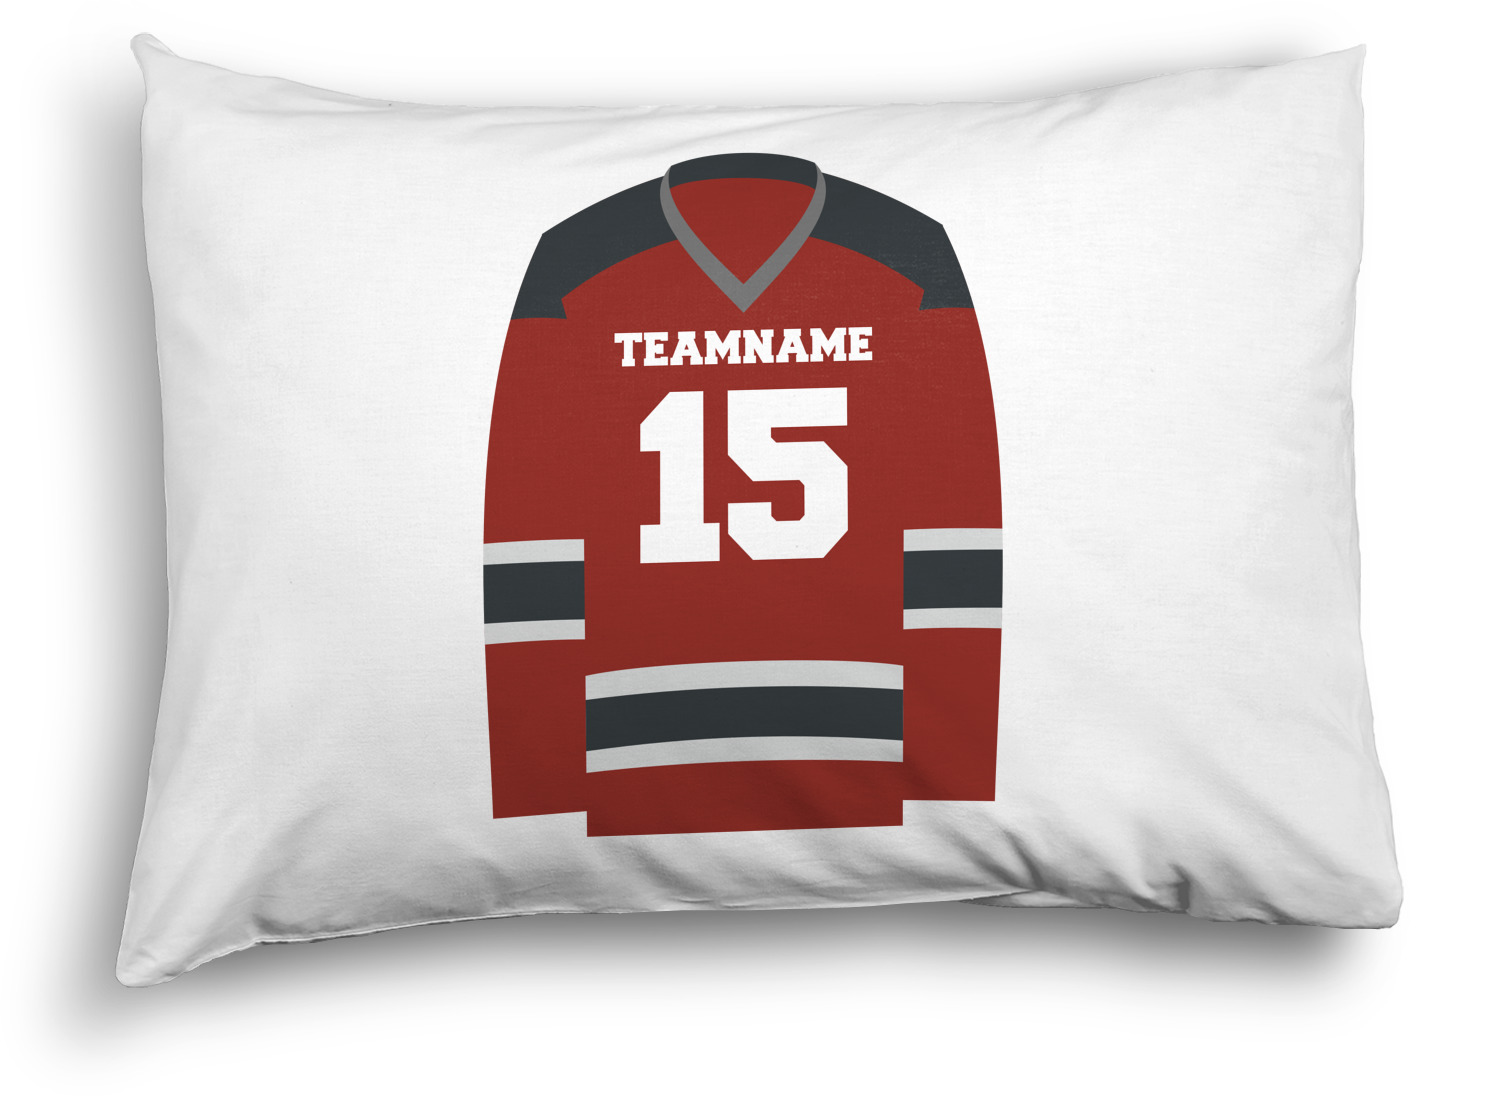 https://www.youcustomizeit.com/common/MAKE/797834/Hockey-Full-Pillow-Case-FRONT-partial-print.jpg?lm=1697661253